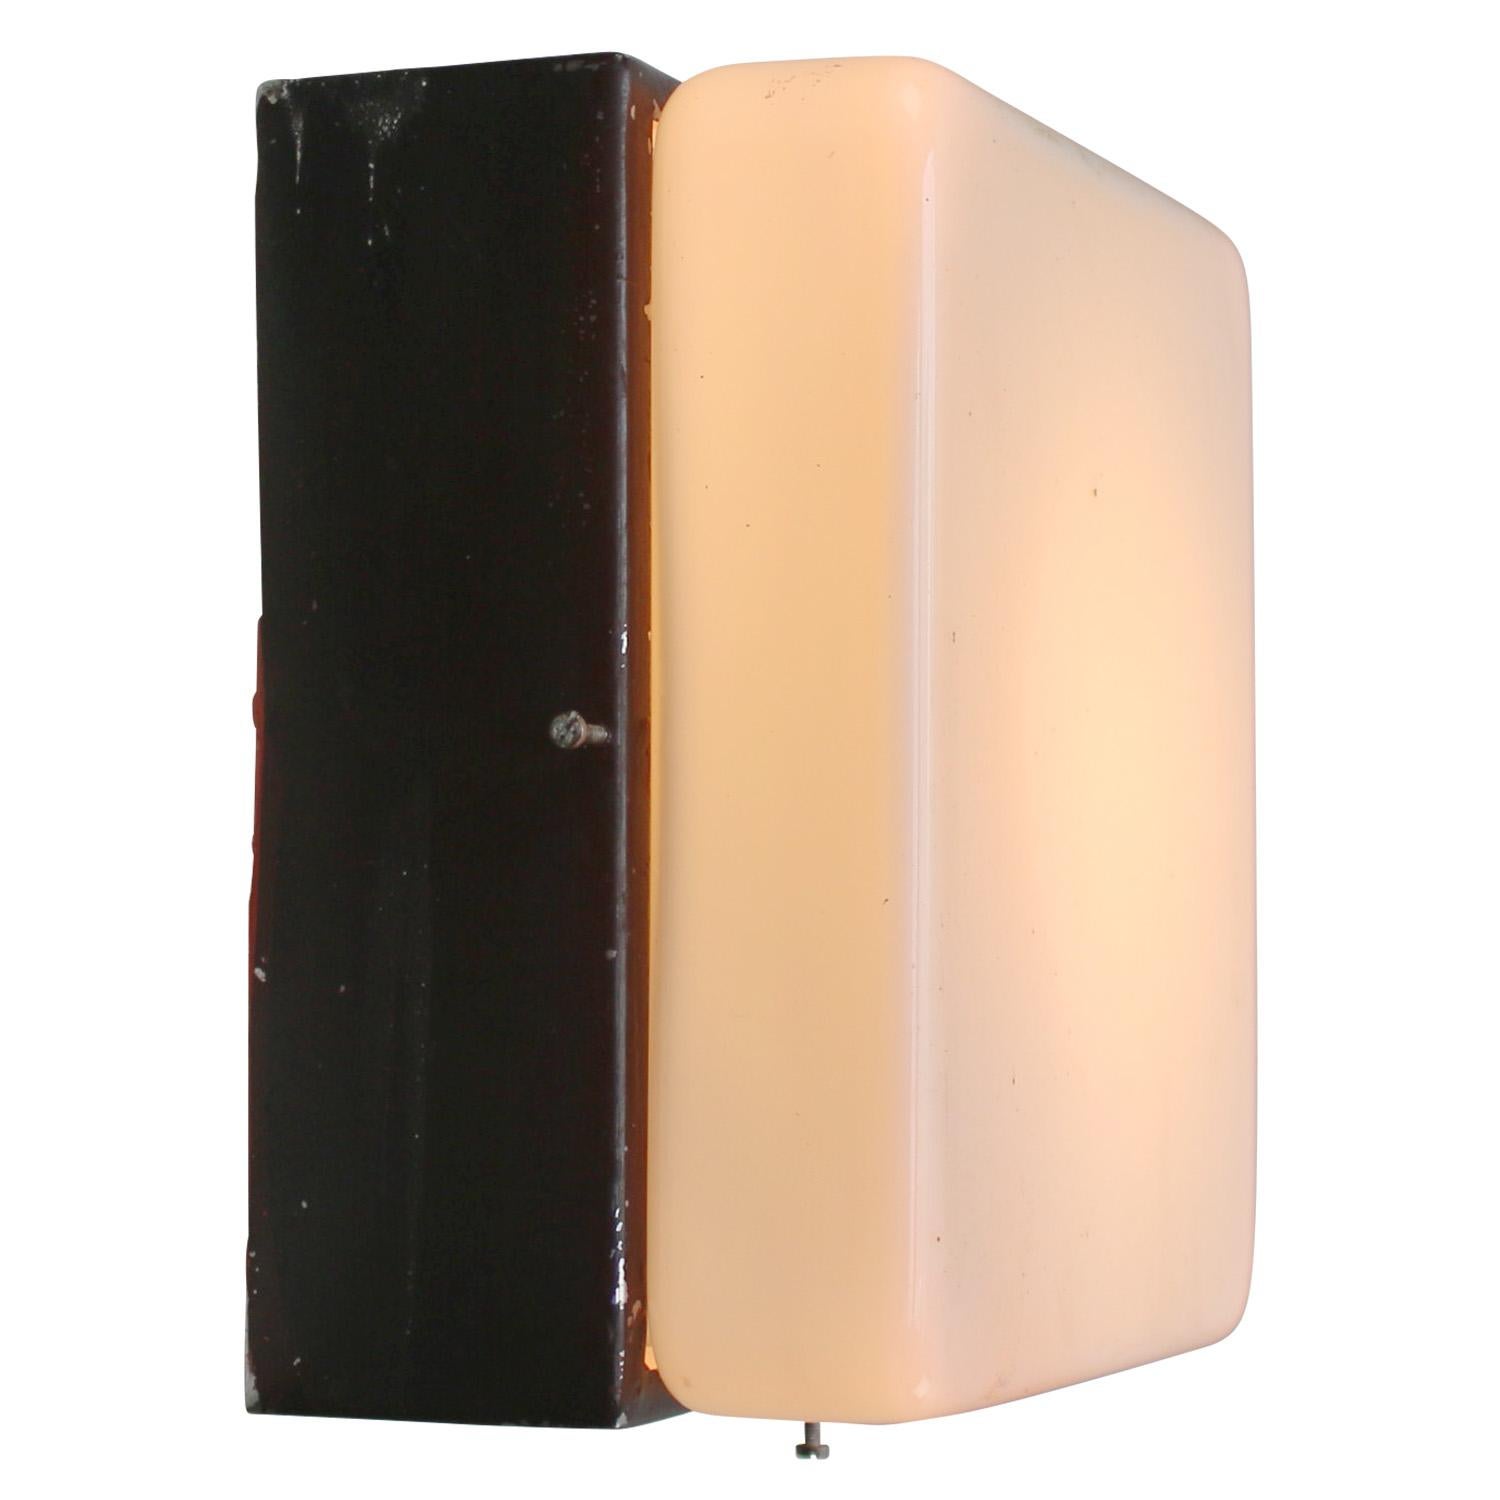 Opaline Industrial scone / ceiling lamp.
Black / dark brown metal base with white opaline glass

Weight: 2.00 kg / 4.4 lb

Priced per individual item. All lamps have been made suitable by international standards for incandescent light bulbs,